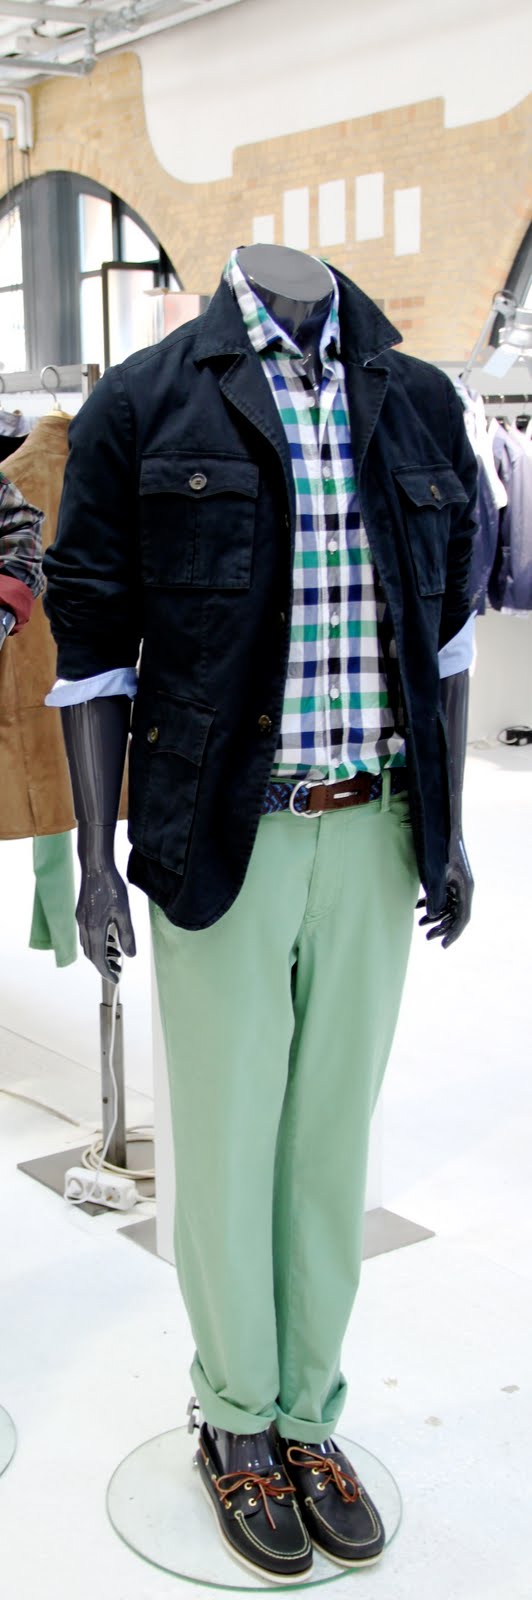 BURLINGTON: A REVAMPED ICONIC CLOTHING BRAND DEBUTS FRESH LOOKS FOR ...